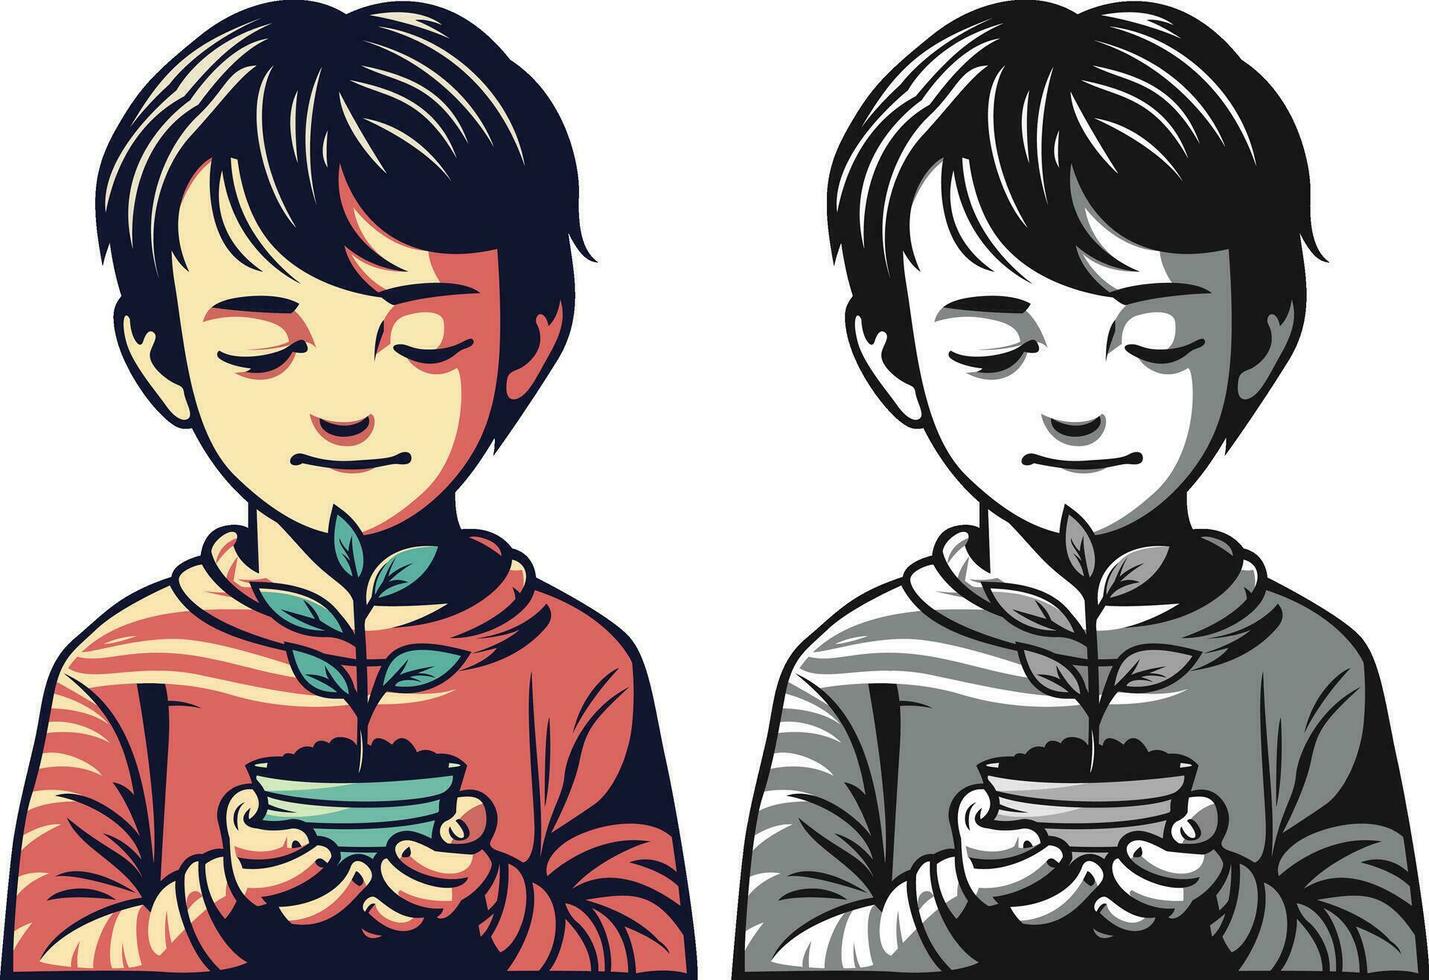 Refugee child, holding a small sapling symbolizing hope, Boy holding a small plant with closed eyes, stock vector image, colored and black and white line art